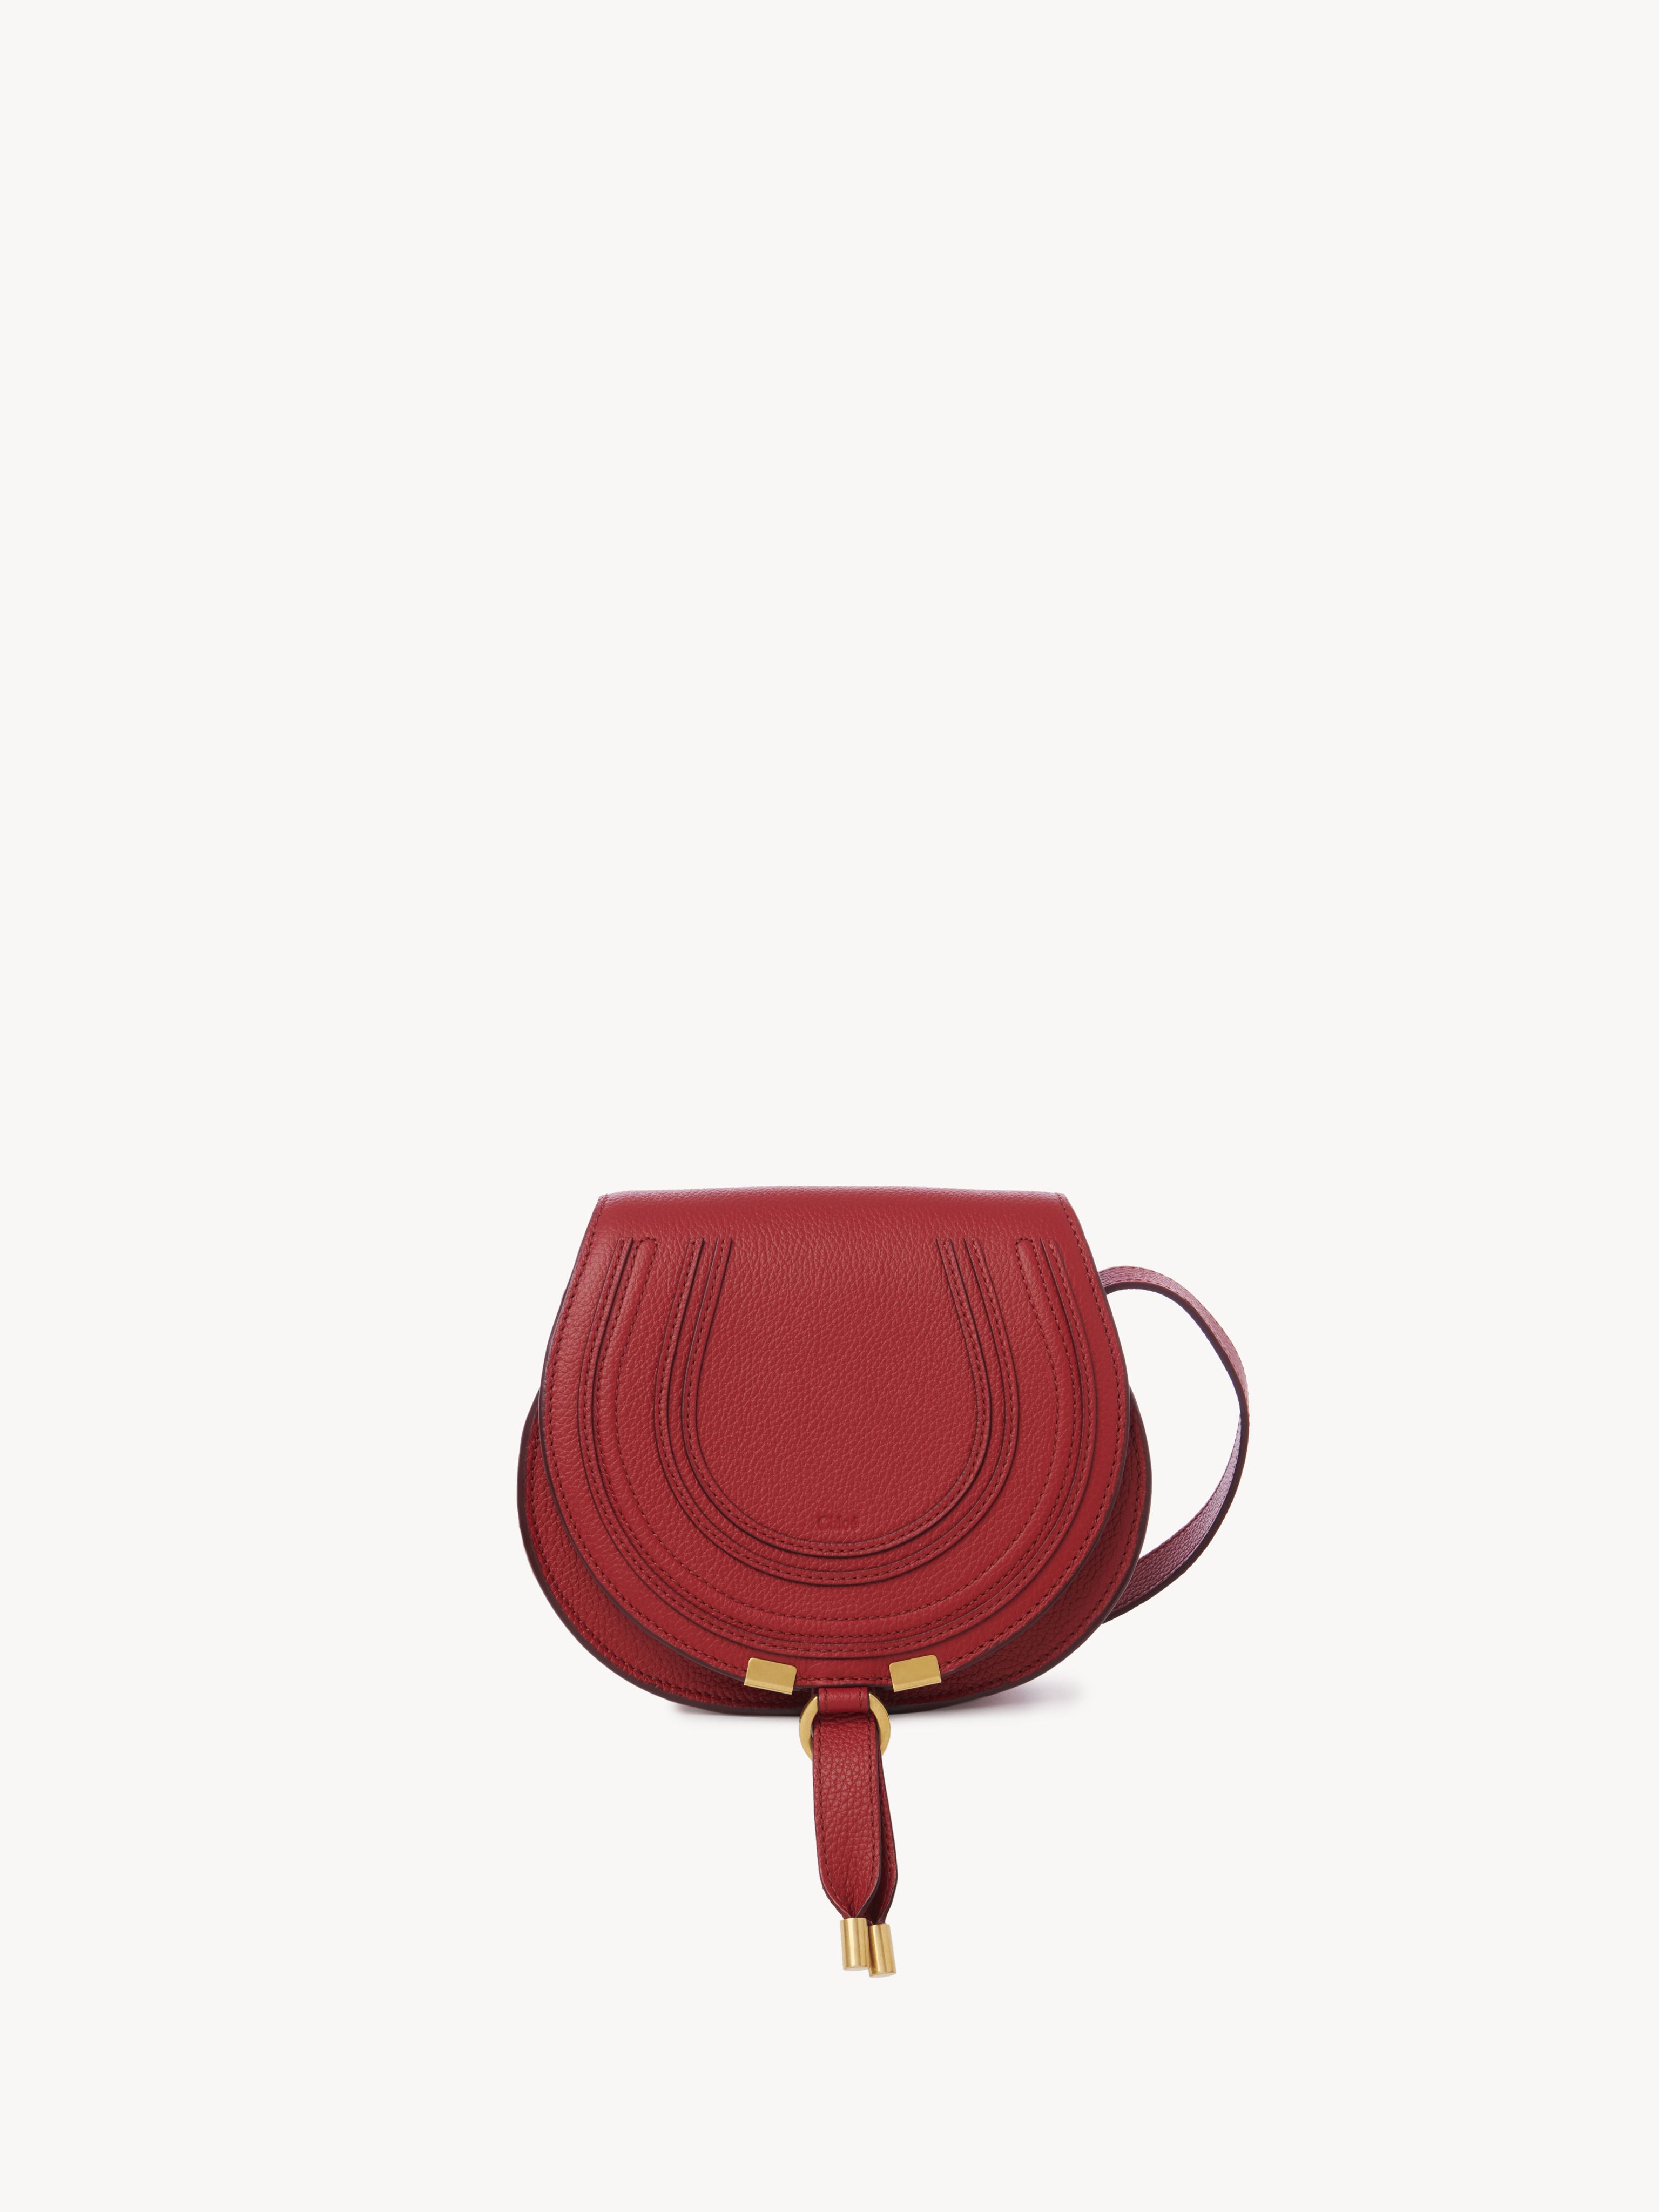 Chloé Marcie Small Saddle Bag Pink Size Onesize 100% Calf-skin Leather In Red